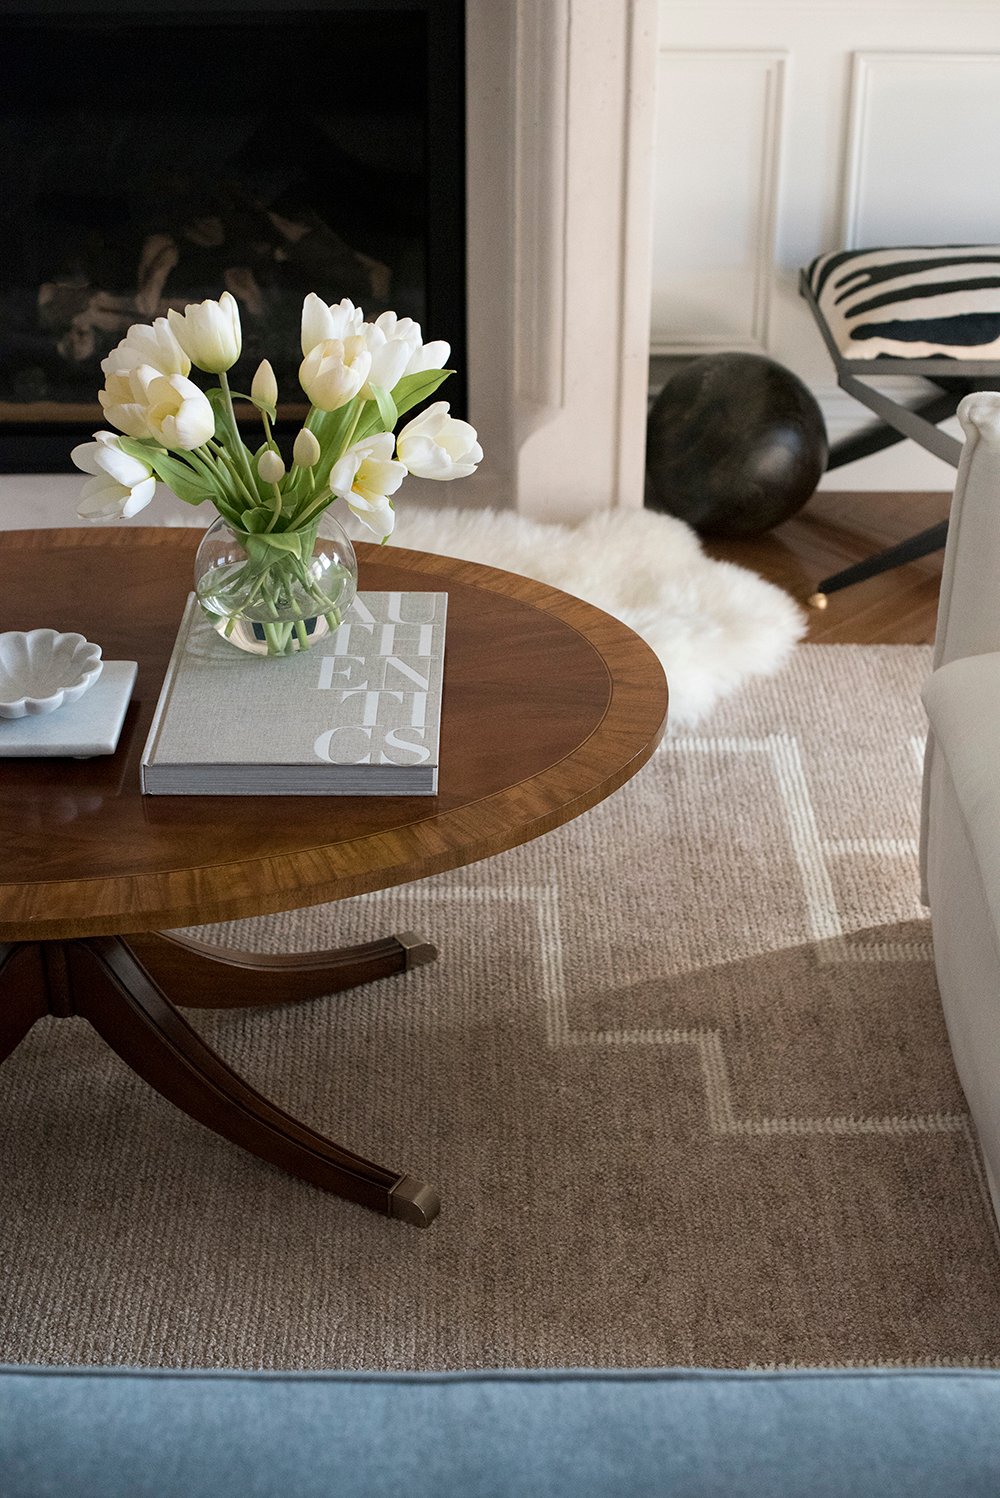 Roundup : Neutral Area Rugs - roomfortuesday.com